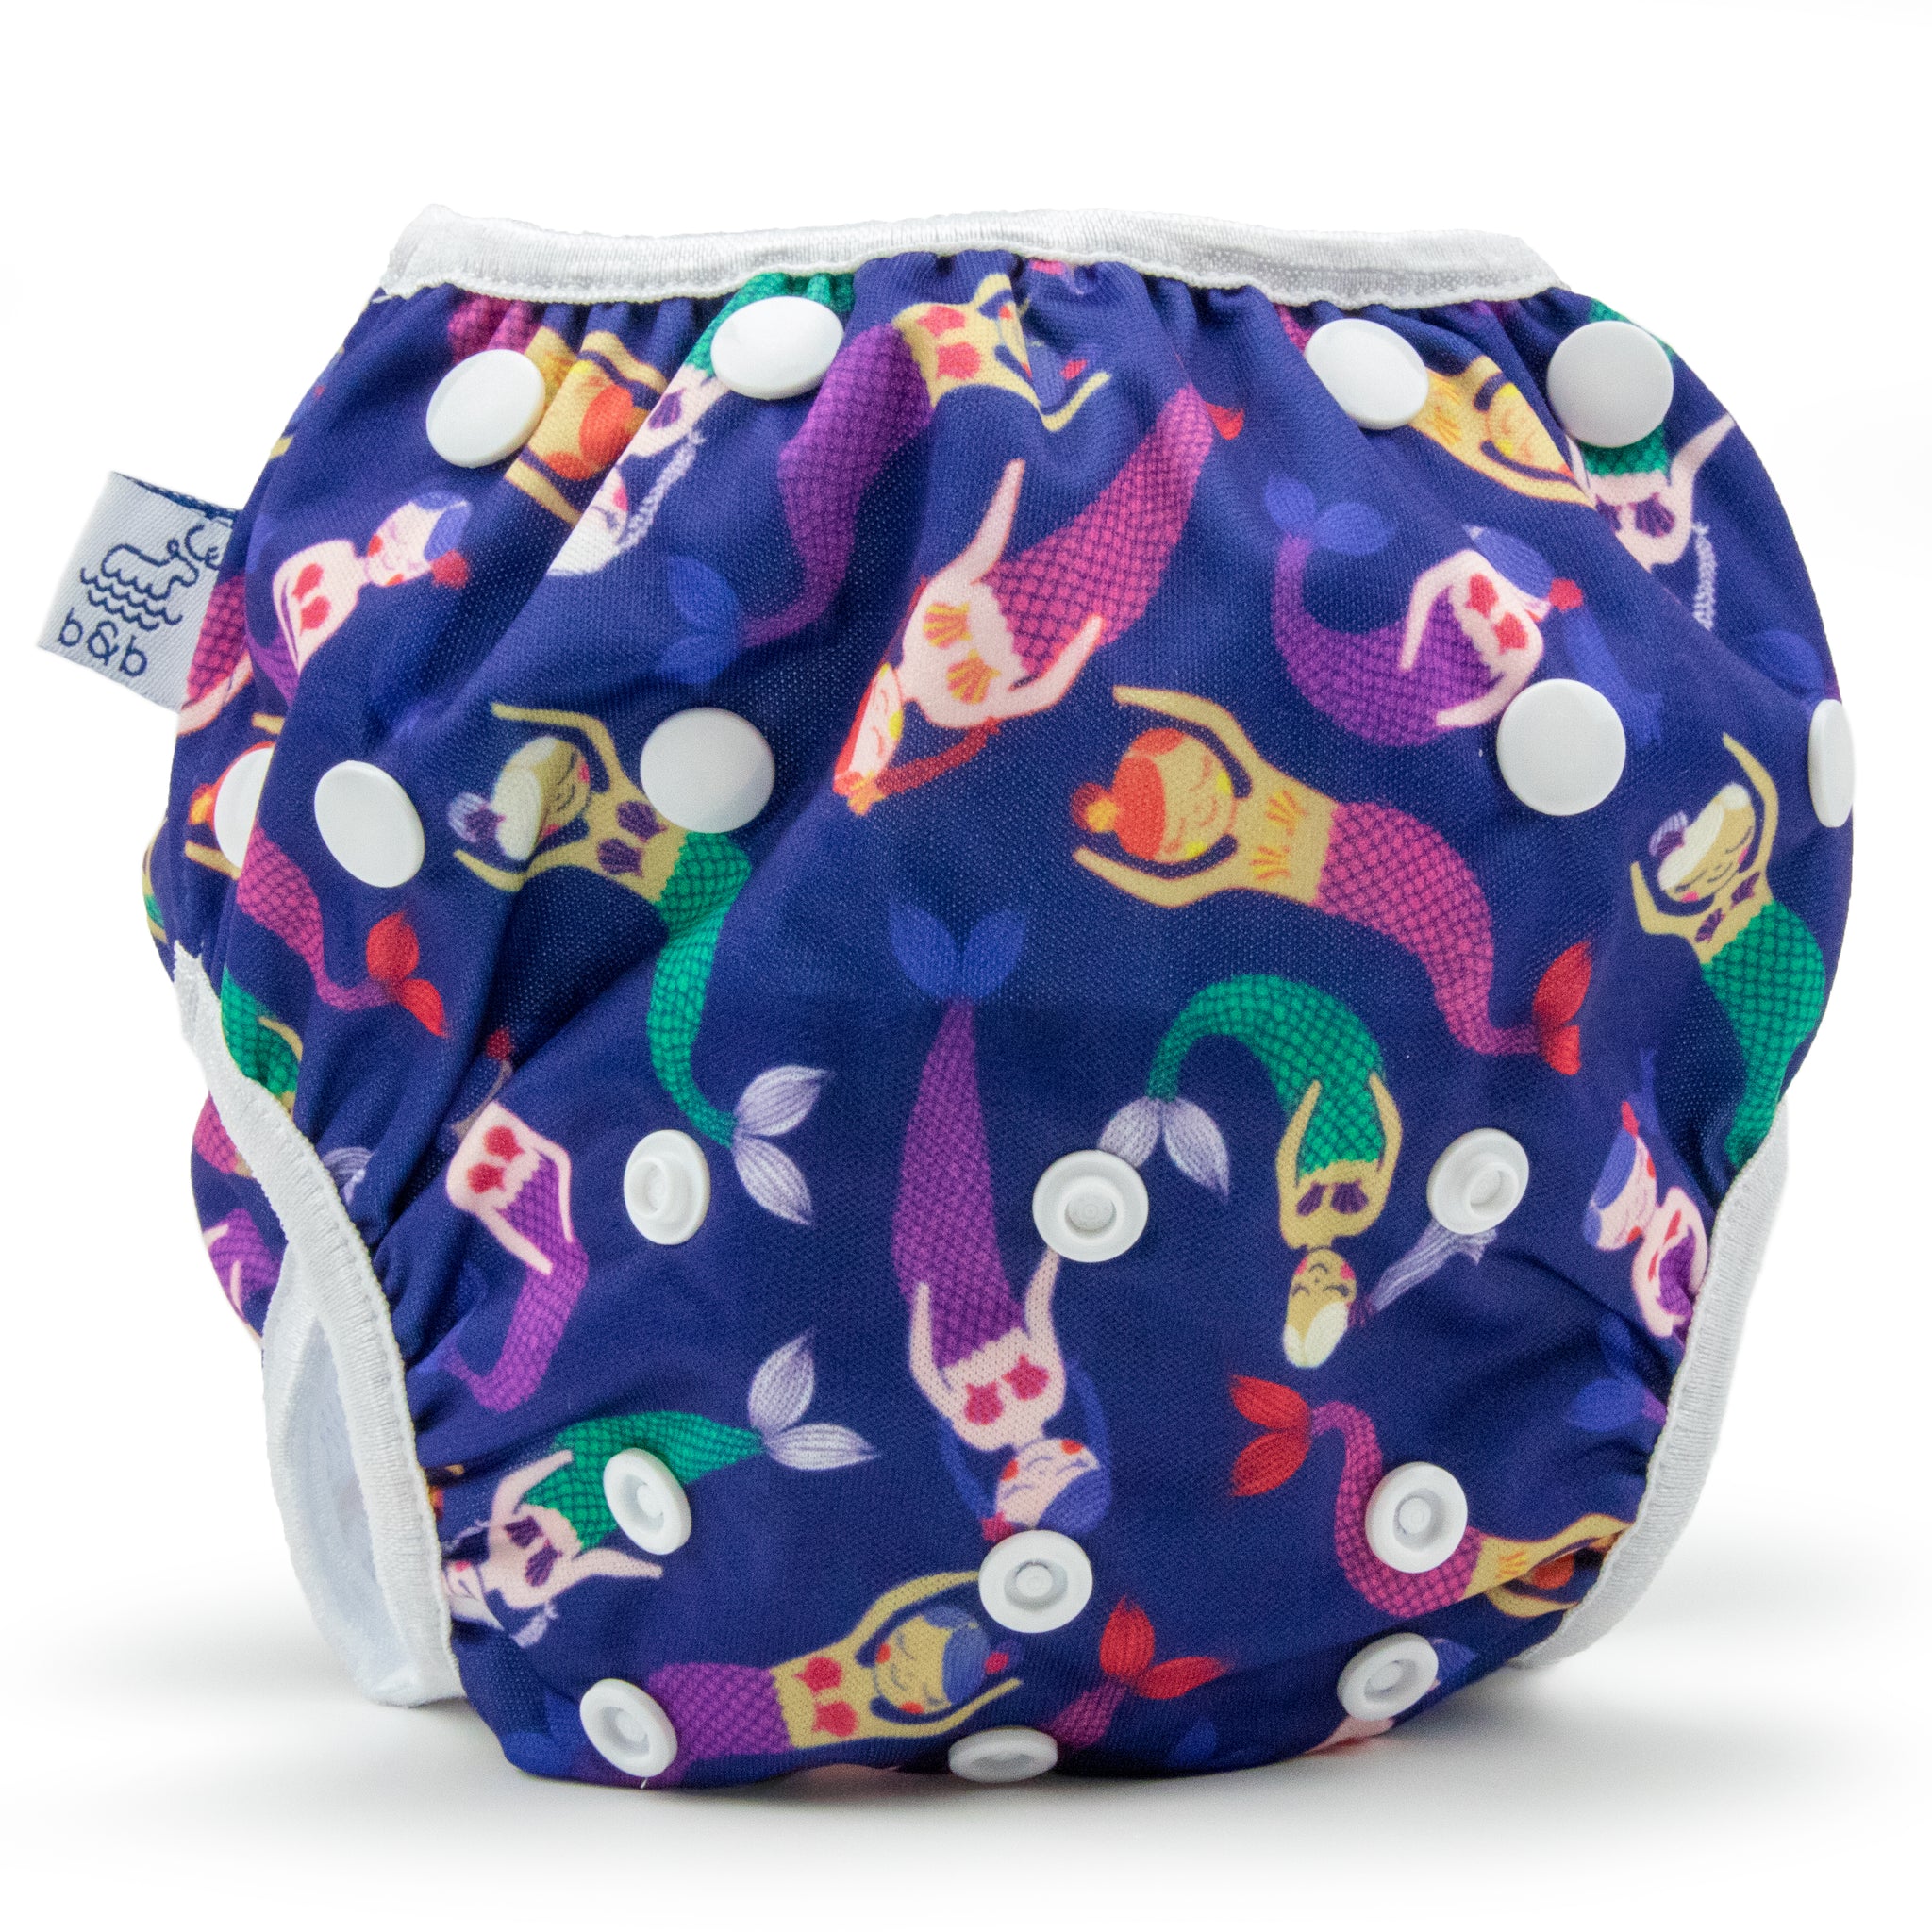 Beau and Belle Littles Swim Diaper, Large Size, dark purple with mermaids, back view